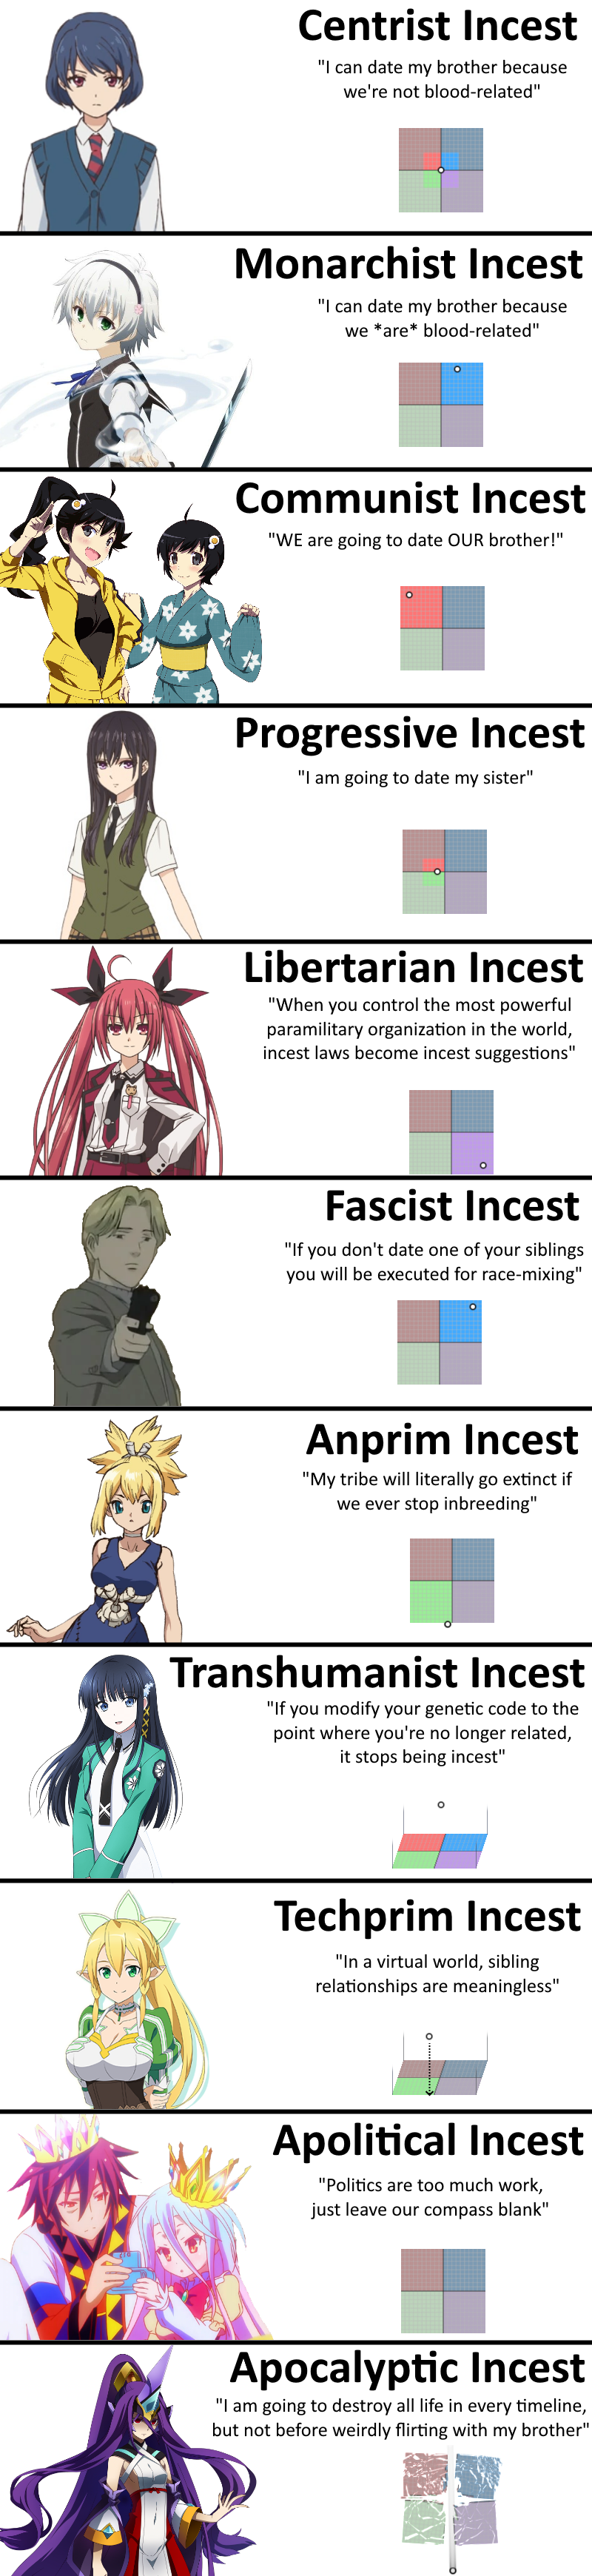 The political compass guide to anime incest